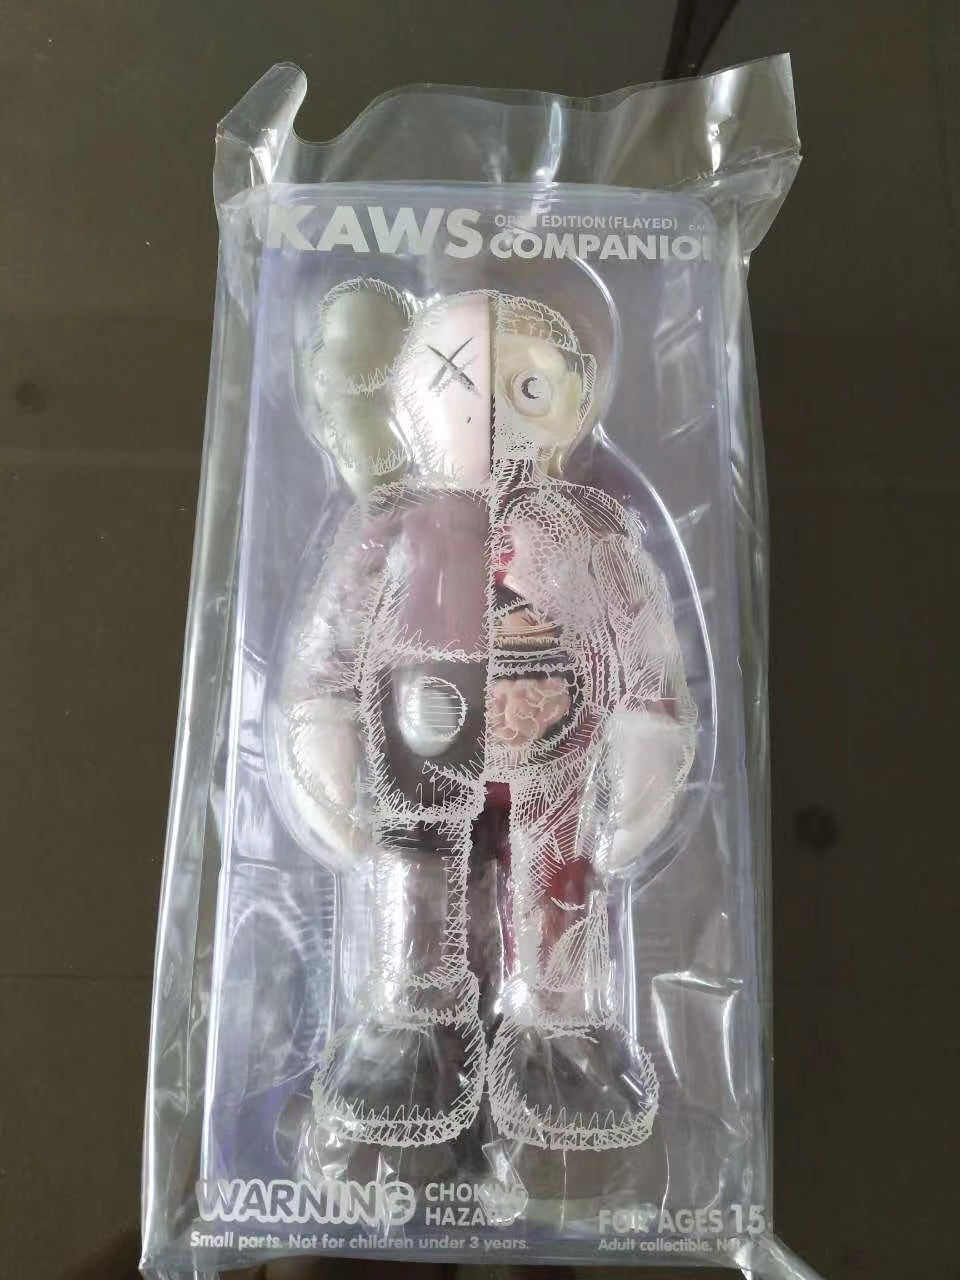 Hobby - 28CM KAW Original Dissected Companion AnimeFigure With Boxed